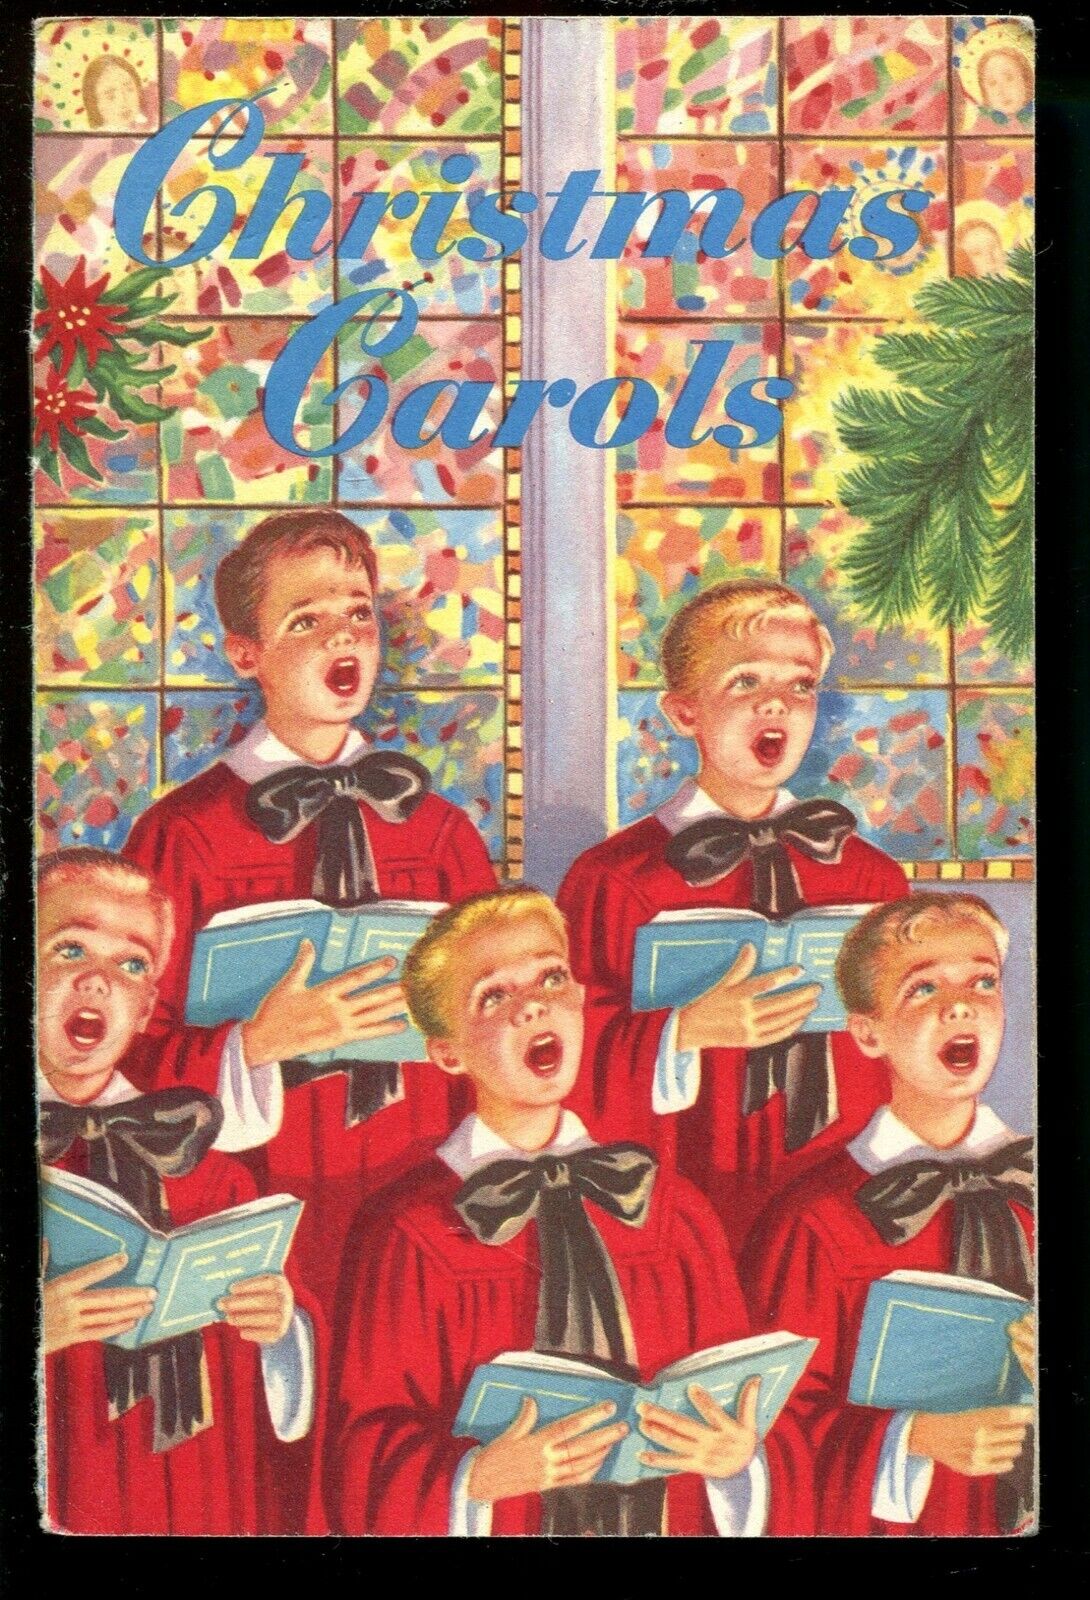 LINDELL TRUST COMPANY, ST LOUIS, M0 - ADVERTISING BOOKLET - CHRISTMAS CAROLS